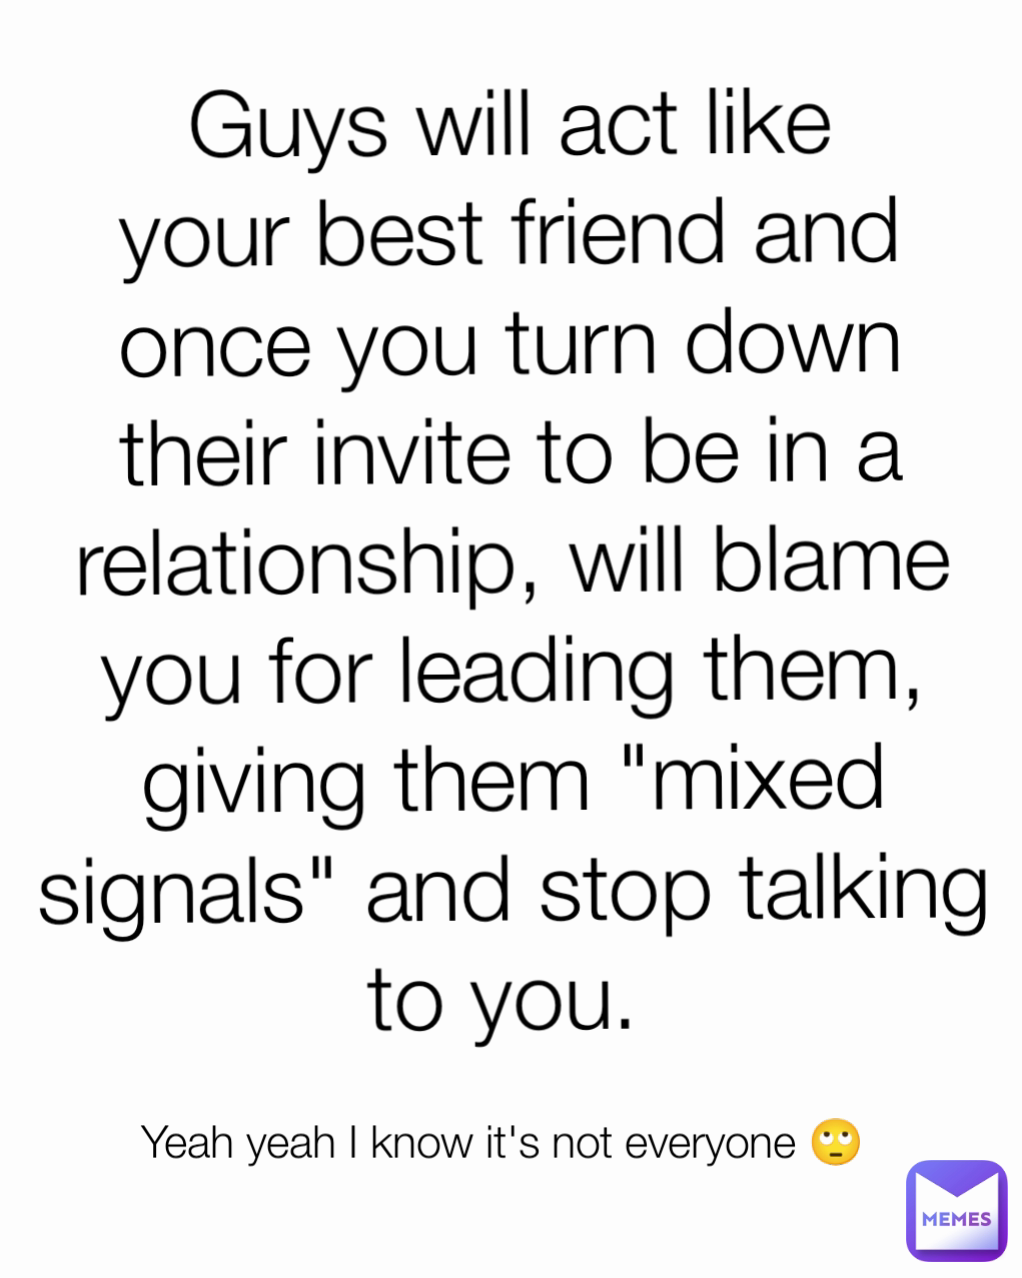 Yeah yeah I know it's not everyone 🙄 Guys will act like your best friend and once you turn down their invite to be in a relationship, will blame you for leading them, giving them "mixed signals" and stop talking to you. 